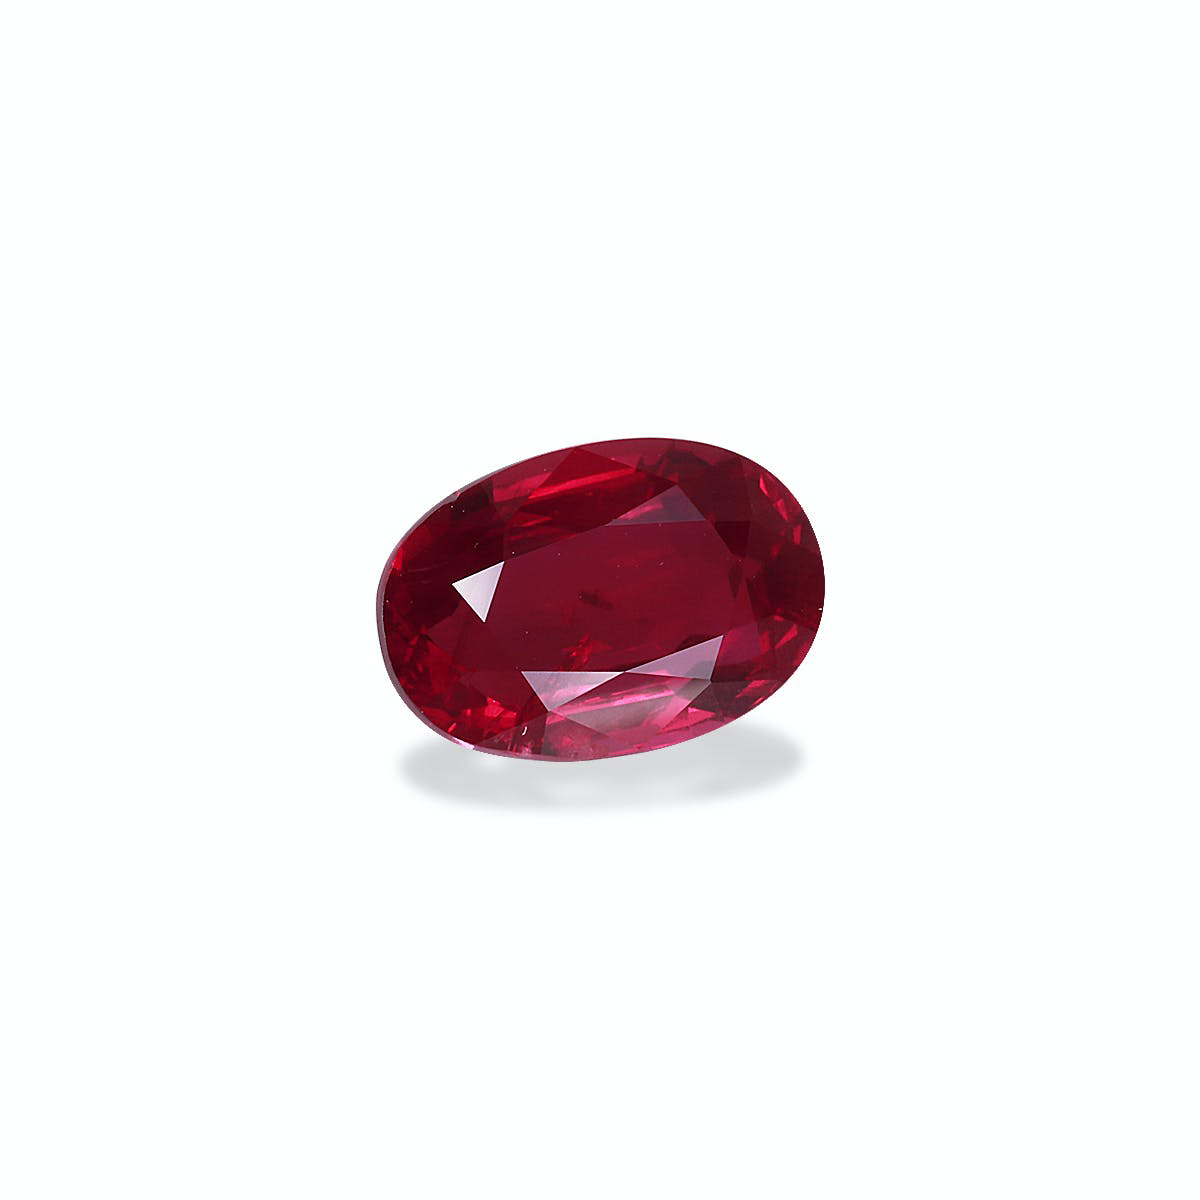 Picture of Pigeons Blood Unheated Mozambique Ruby 3.04ct (GBC-38)